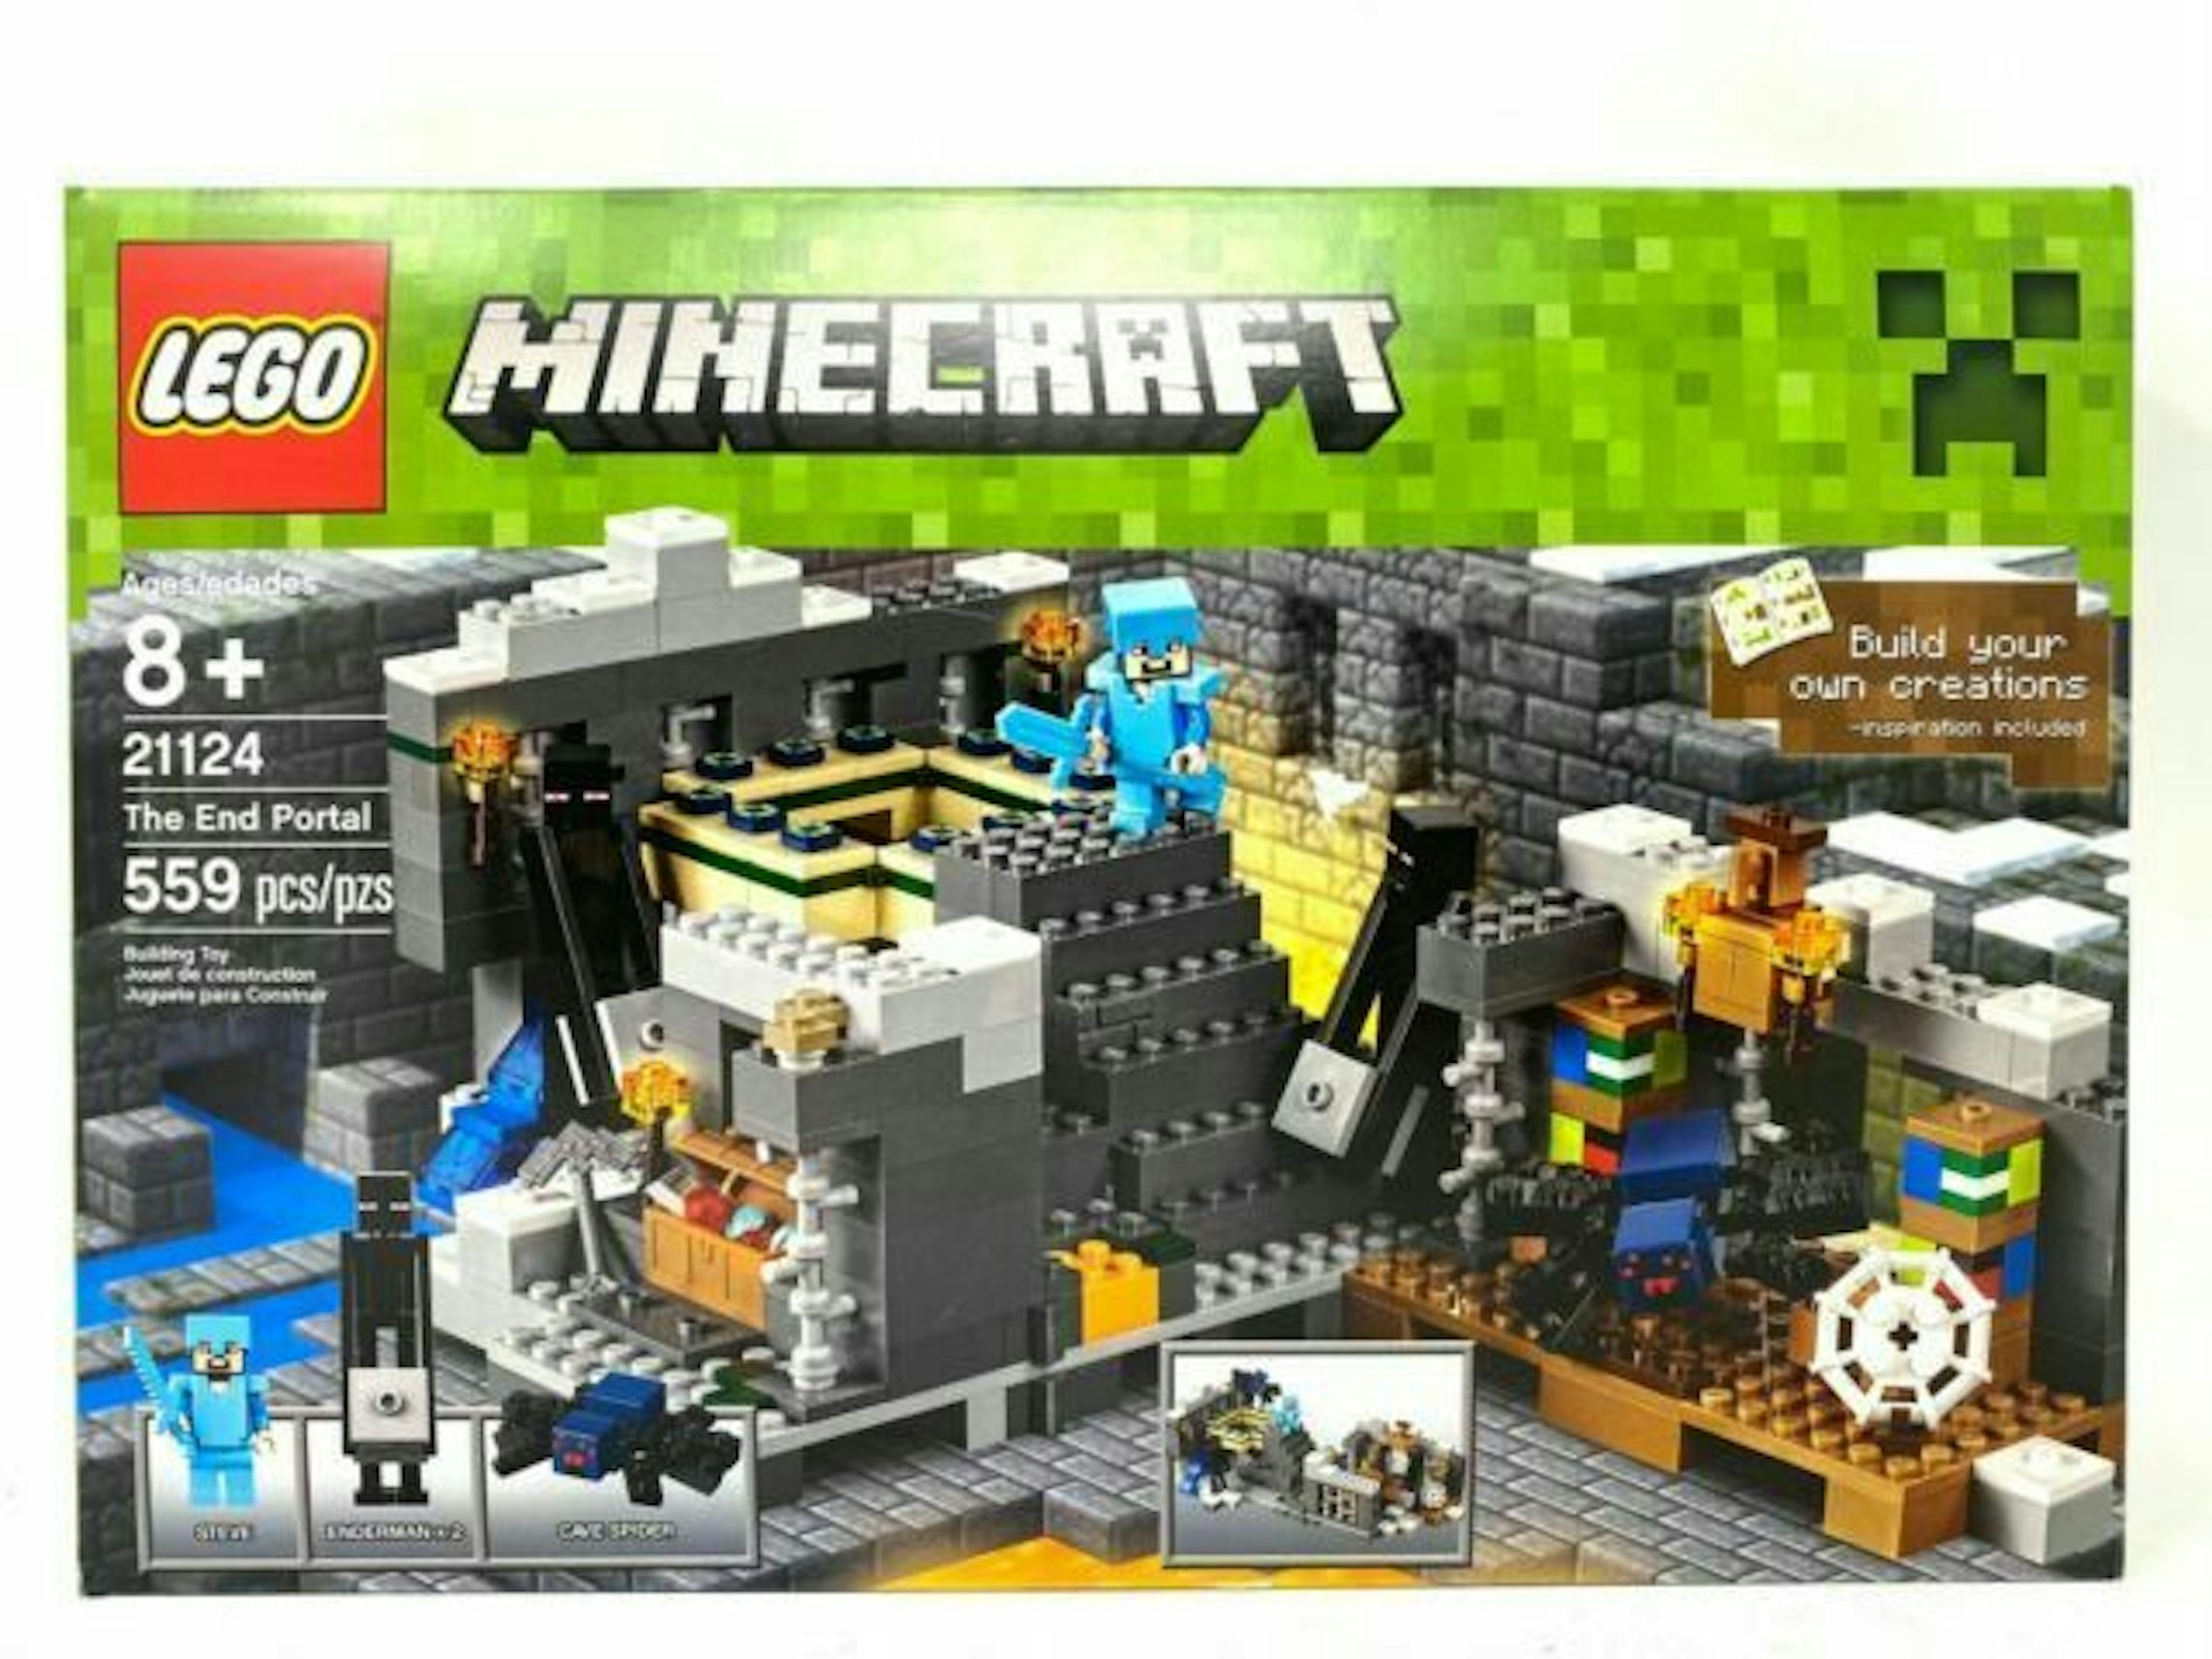 Minecraft Lego Set The Wither 21126 Complete 3 Minifigures